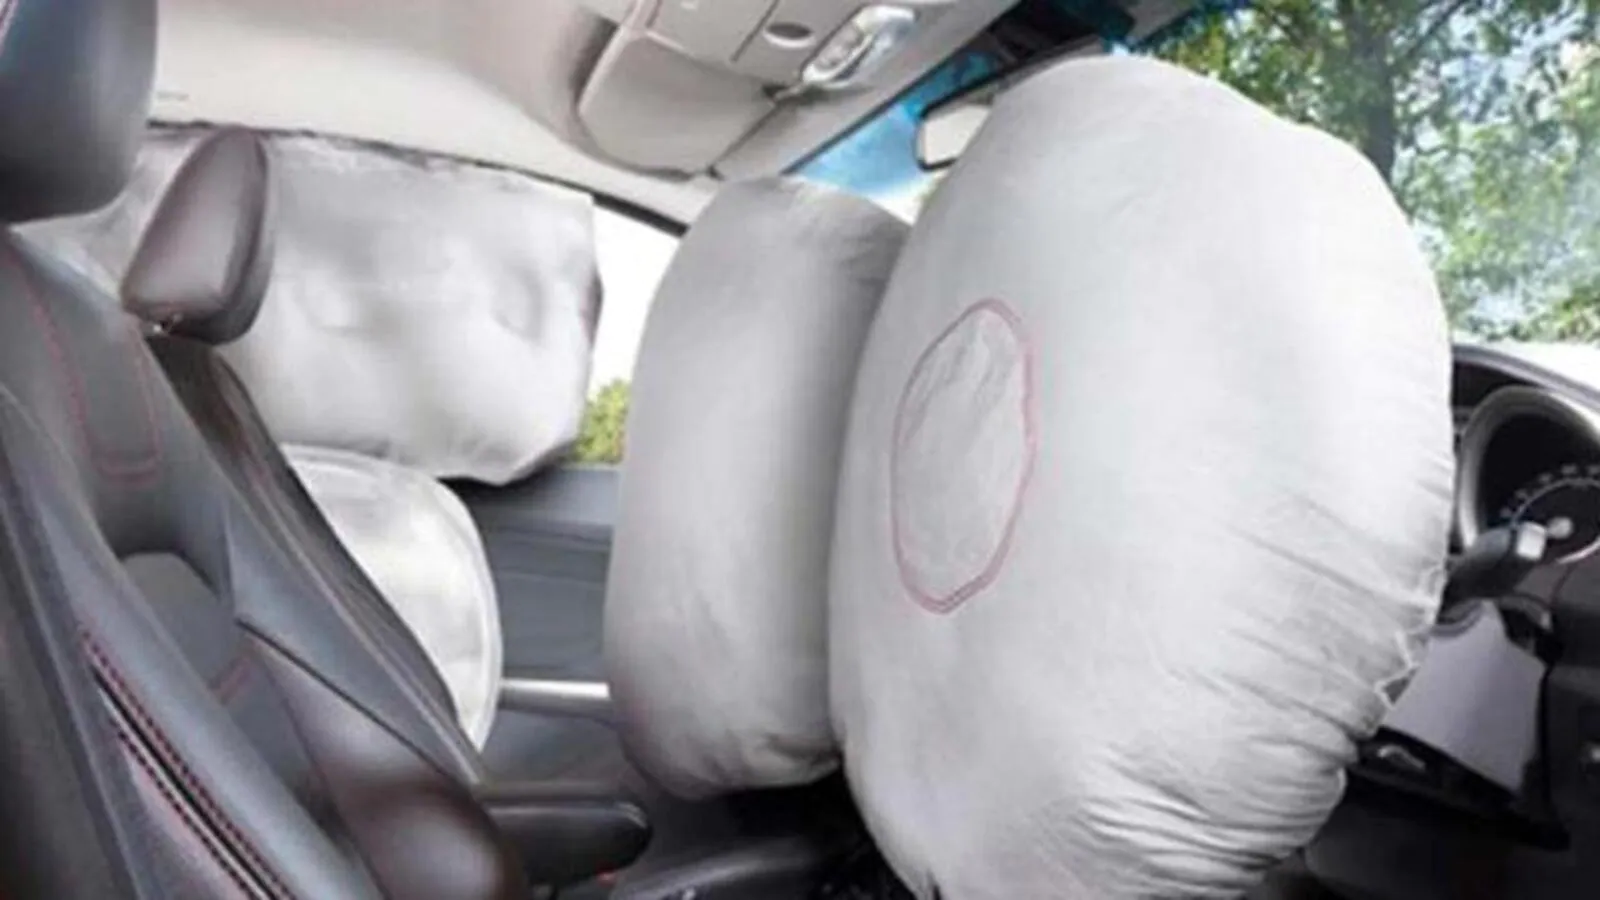 Carmakers liable to pay damages if airbags don’t deploy, orders Supreme Court